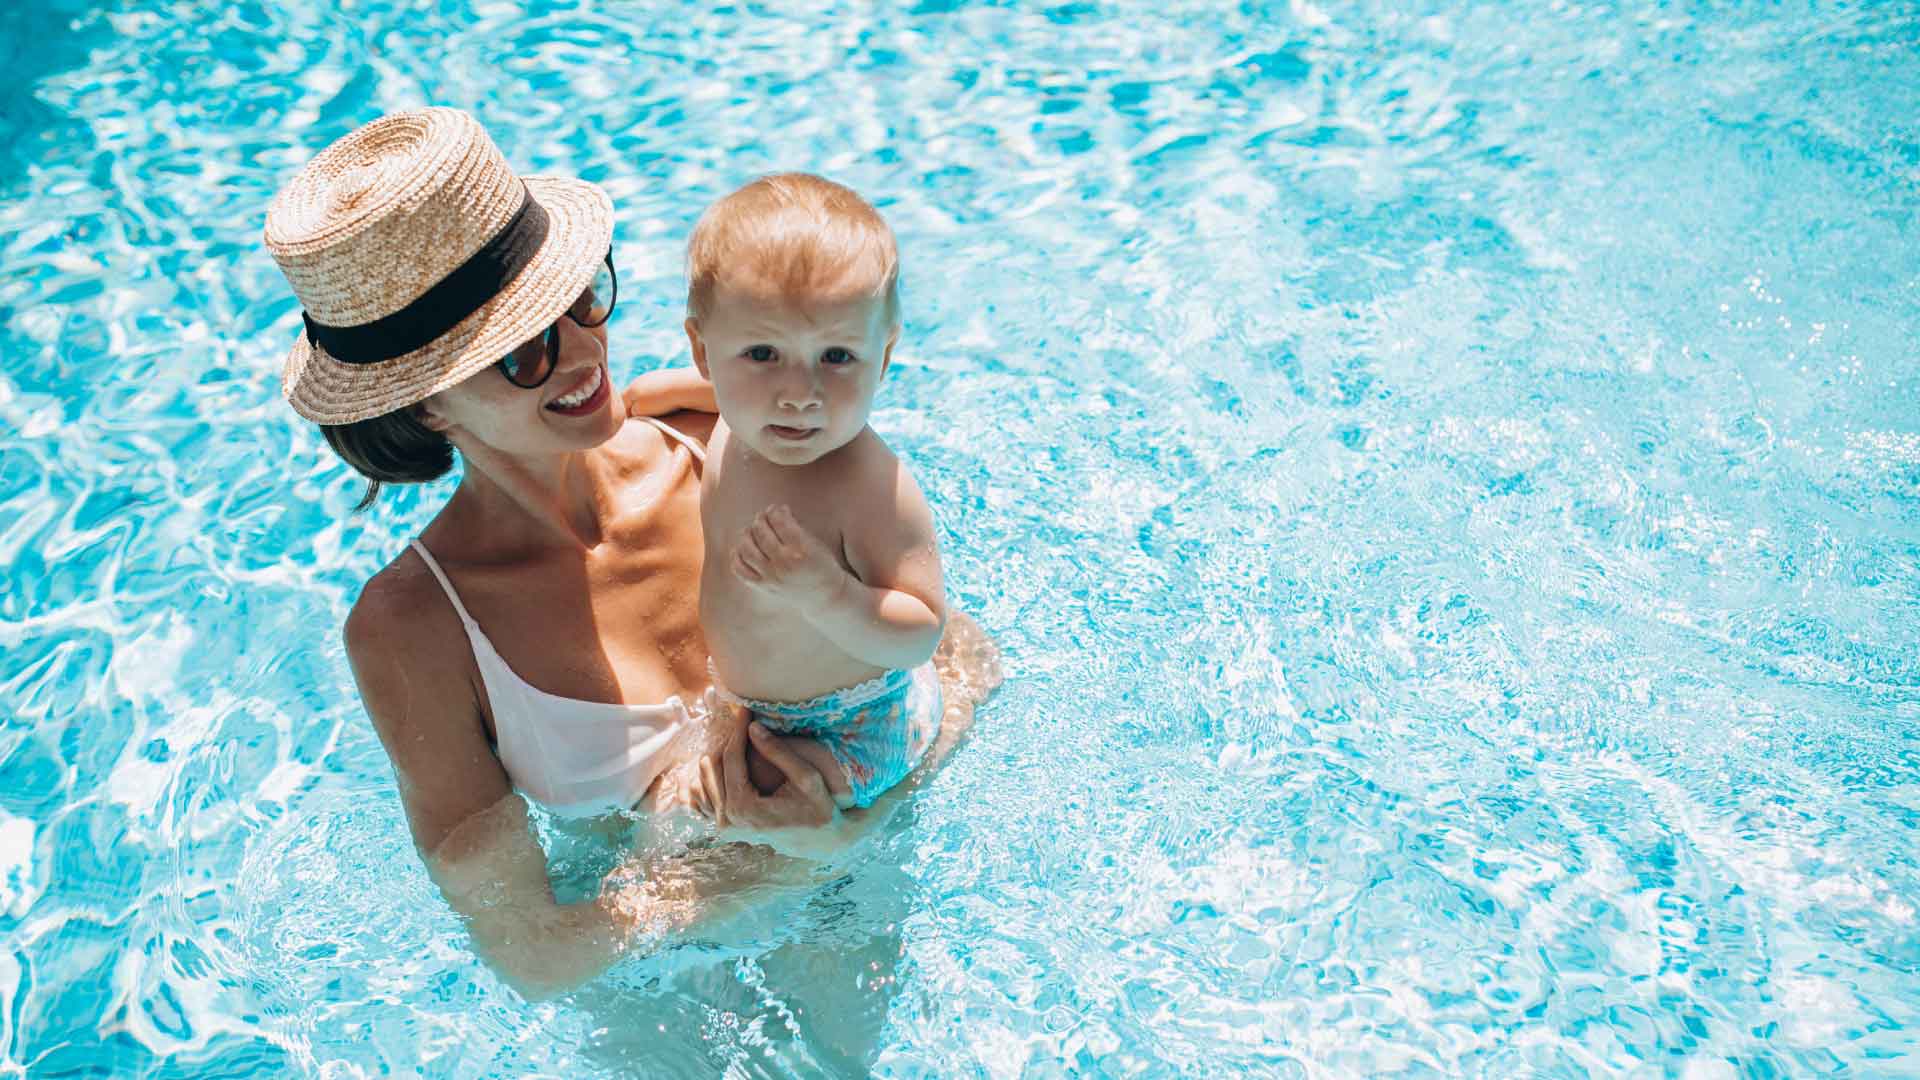 Seven reasons why having a pool is even better than going to the beach!